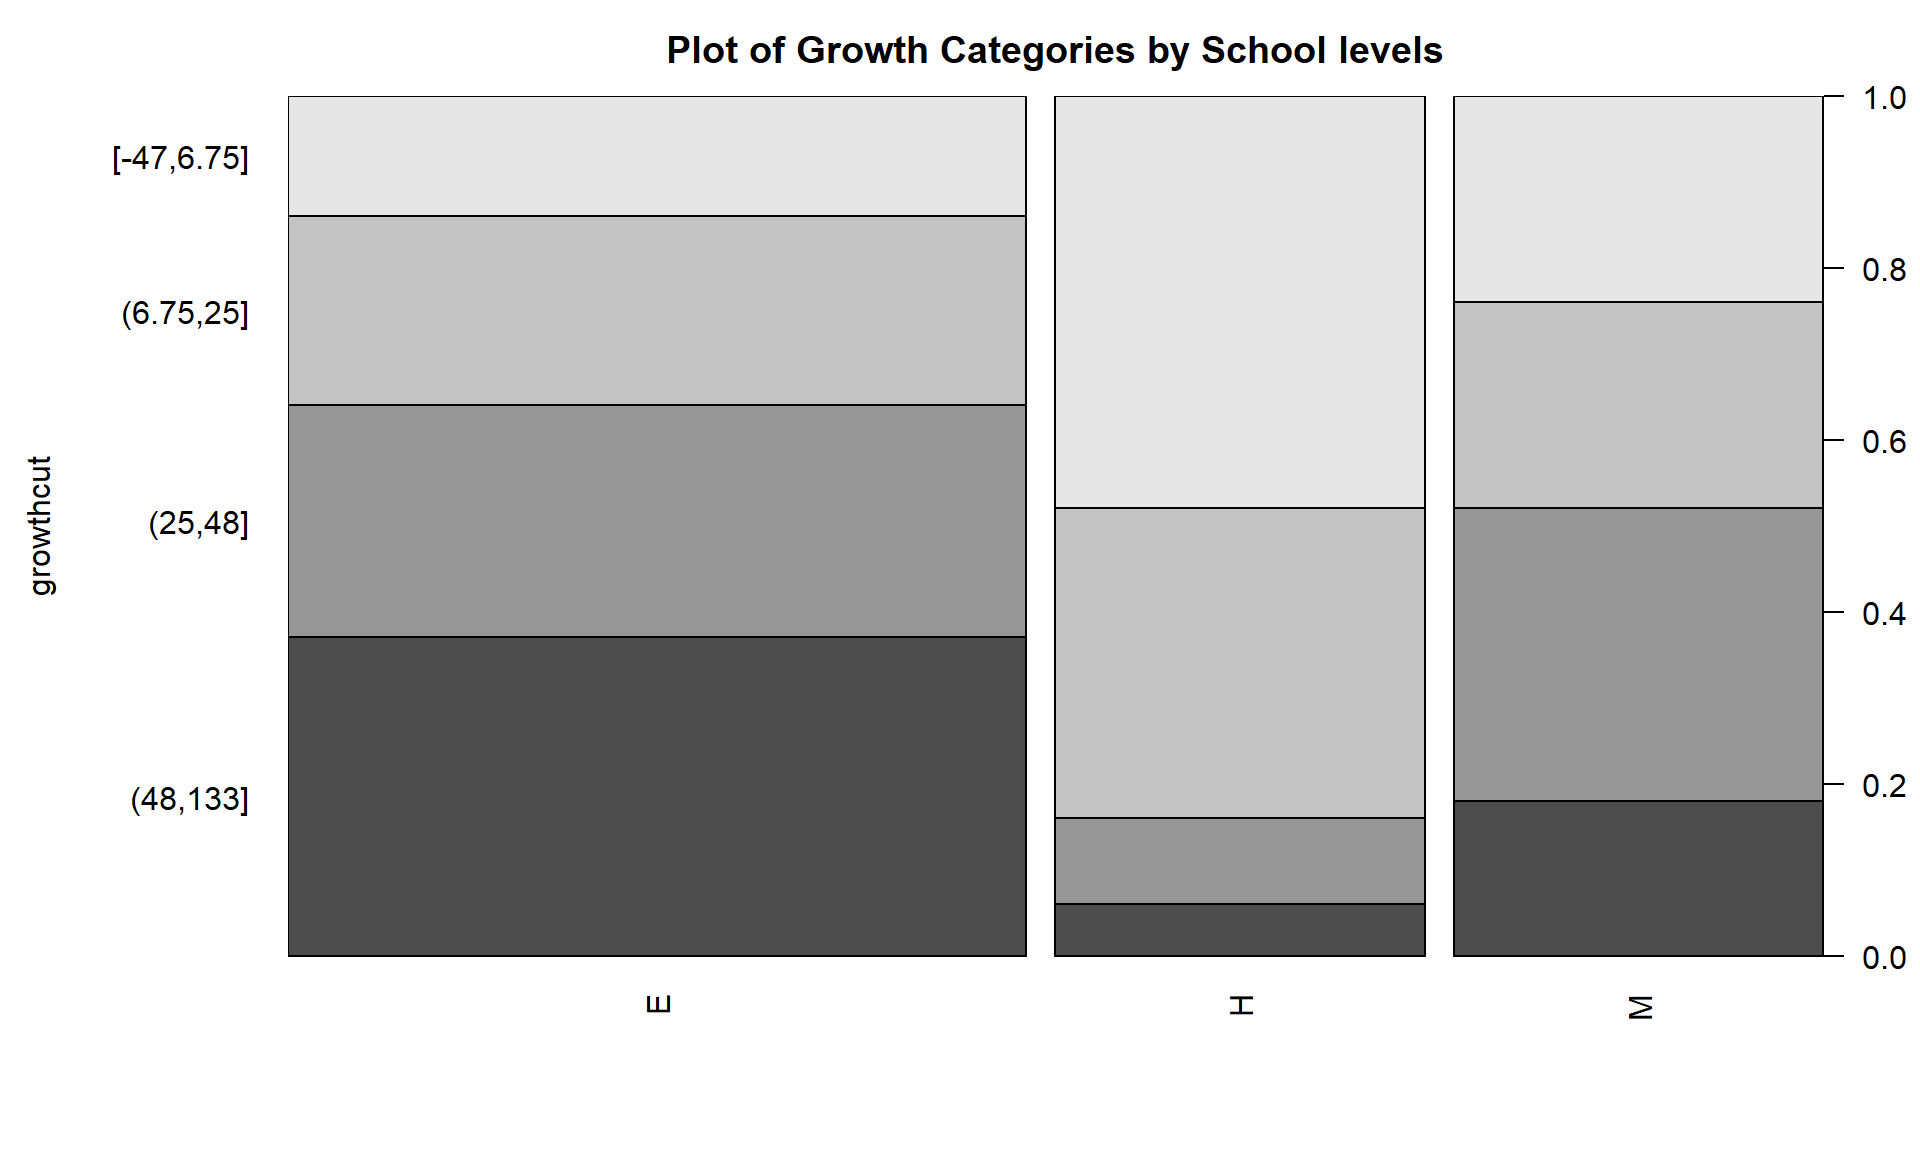 Stacked bar chart of the growth category responses by level of school.